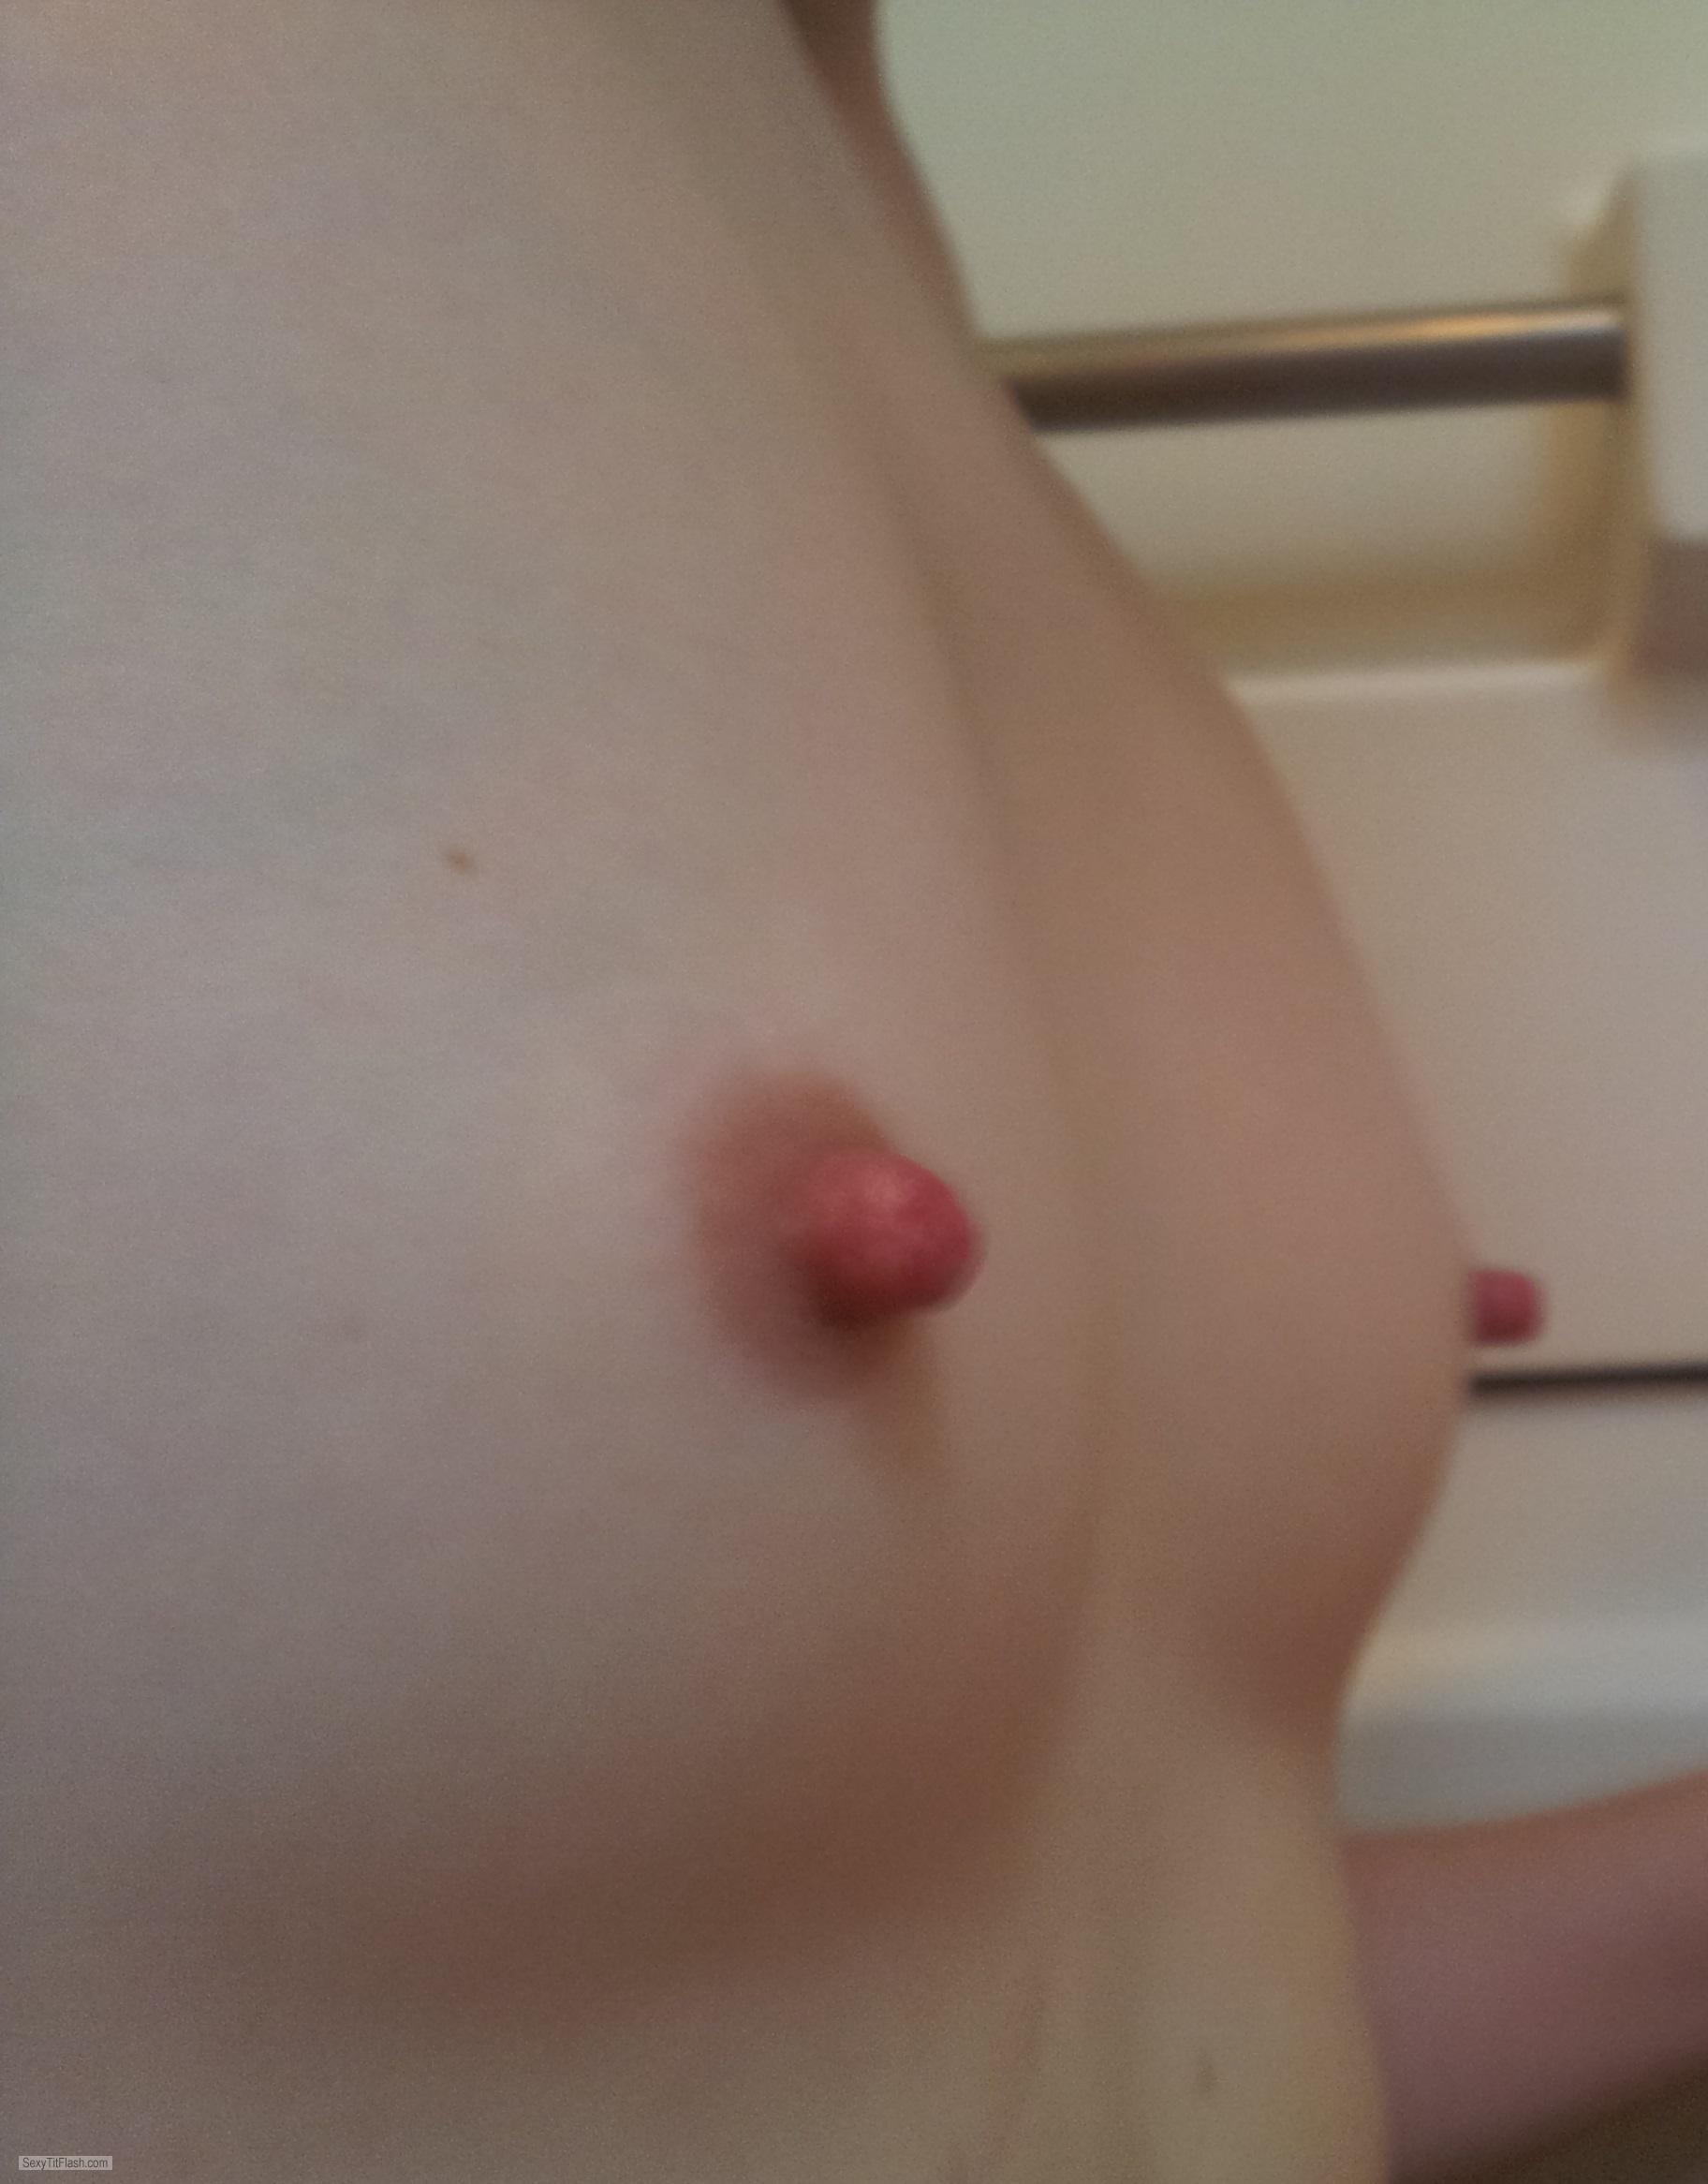 Tit Flash: My Very Small Tits (Selfie) - SideViewTitties from Mexico